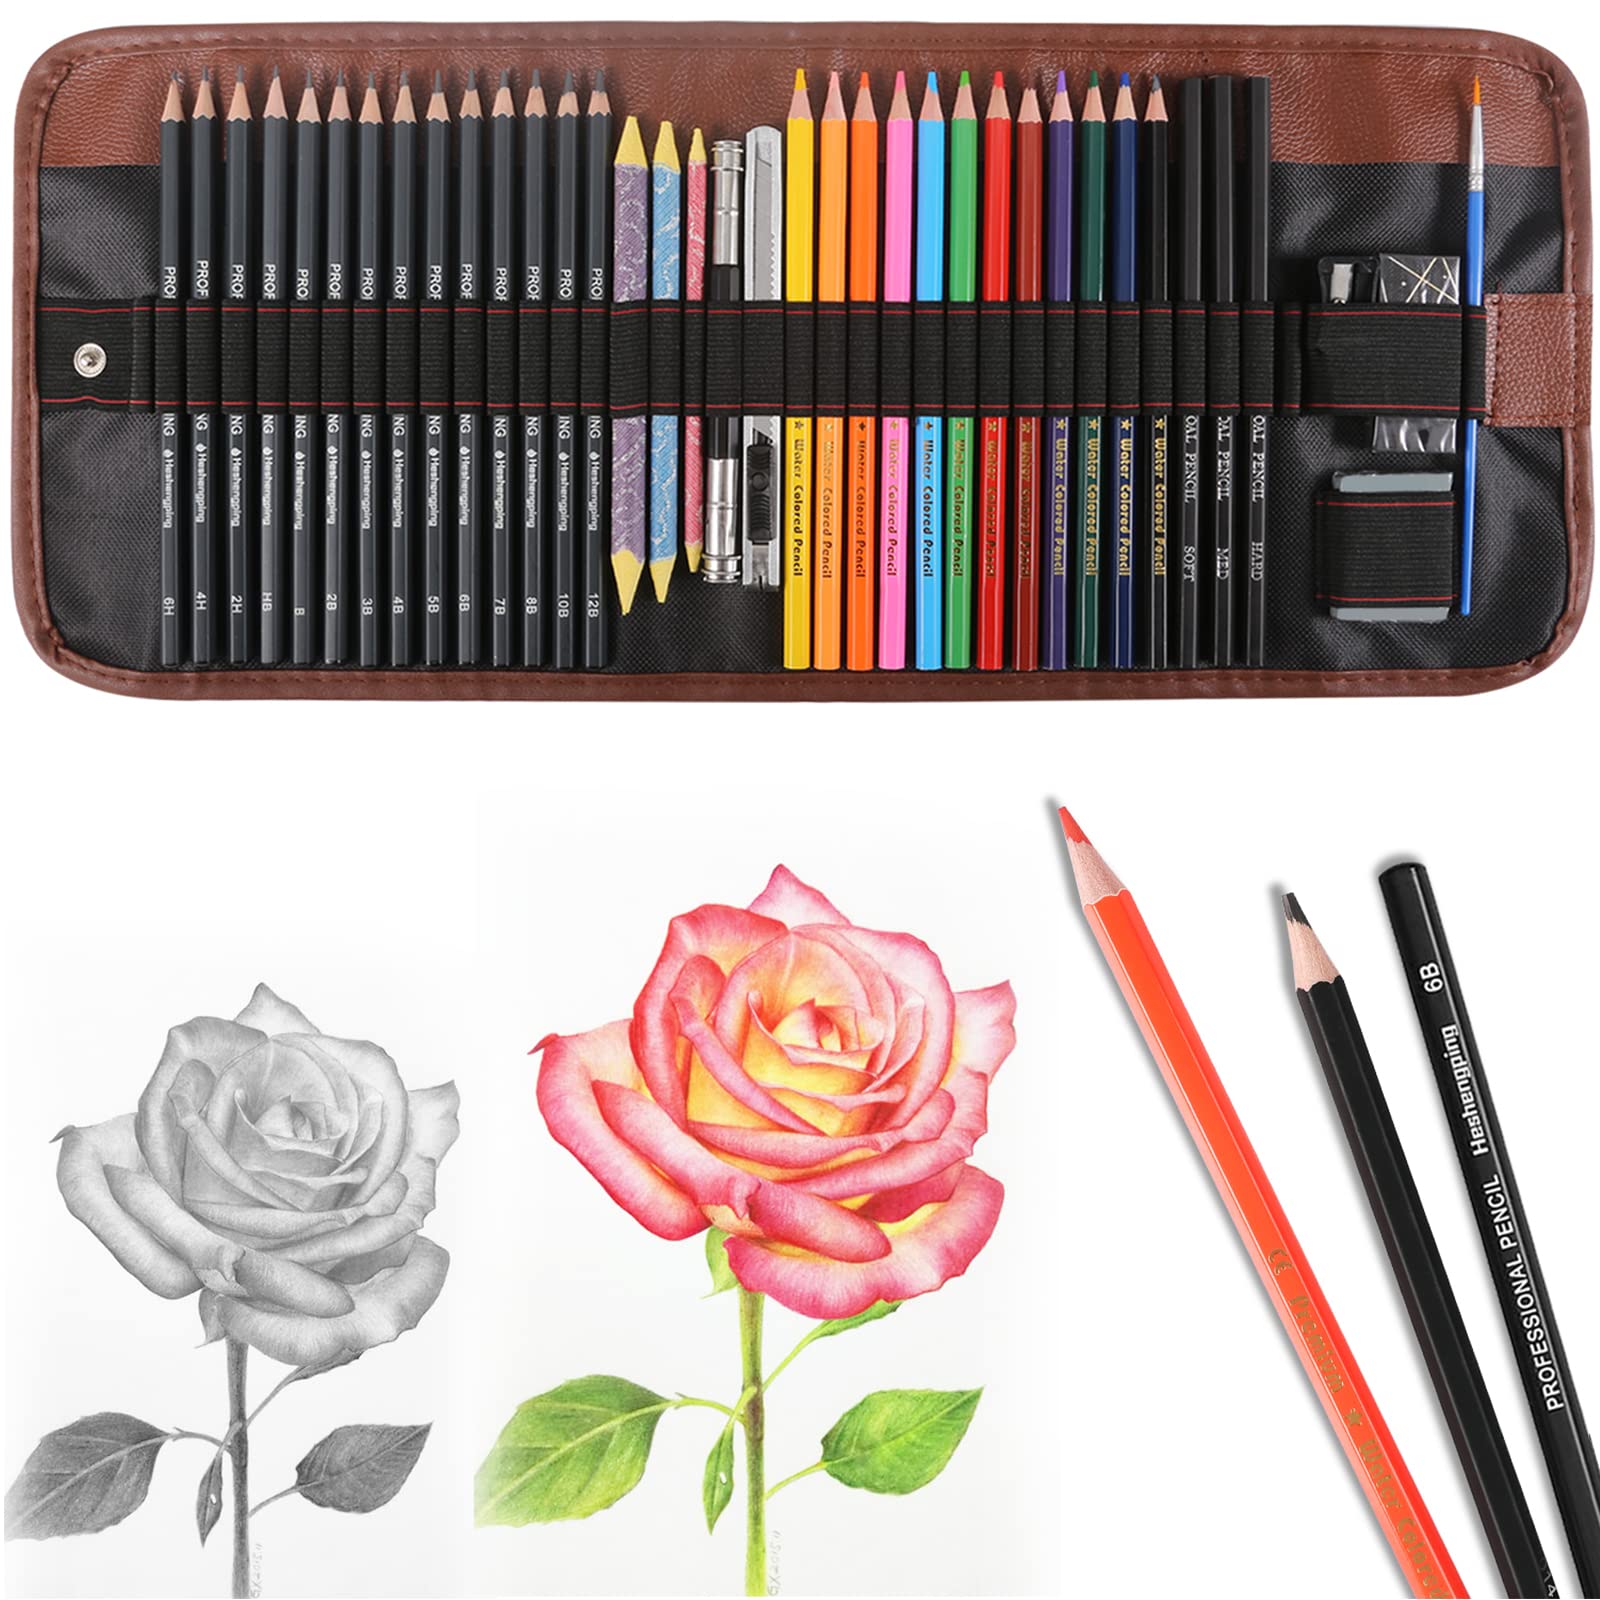 48 pcs Drawing Pencils Kit Sketch Set,Artists Sketching Pencil Set for  Adults Kids Teens Art Supplies Include Charcoal